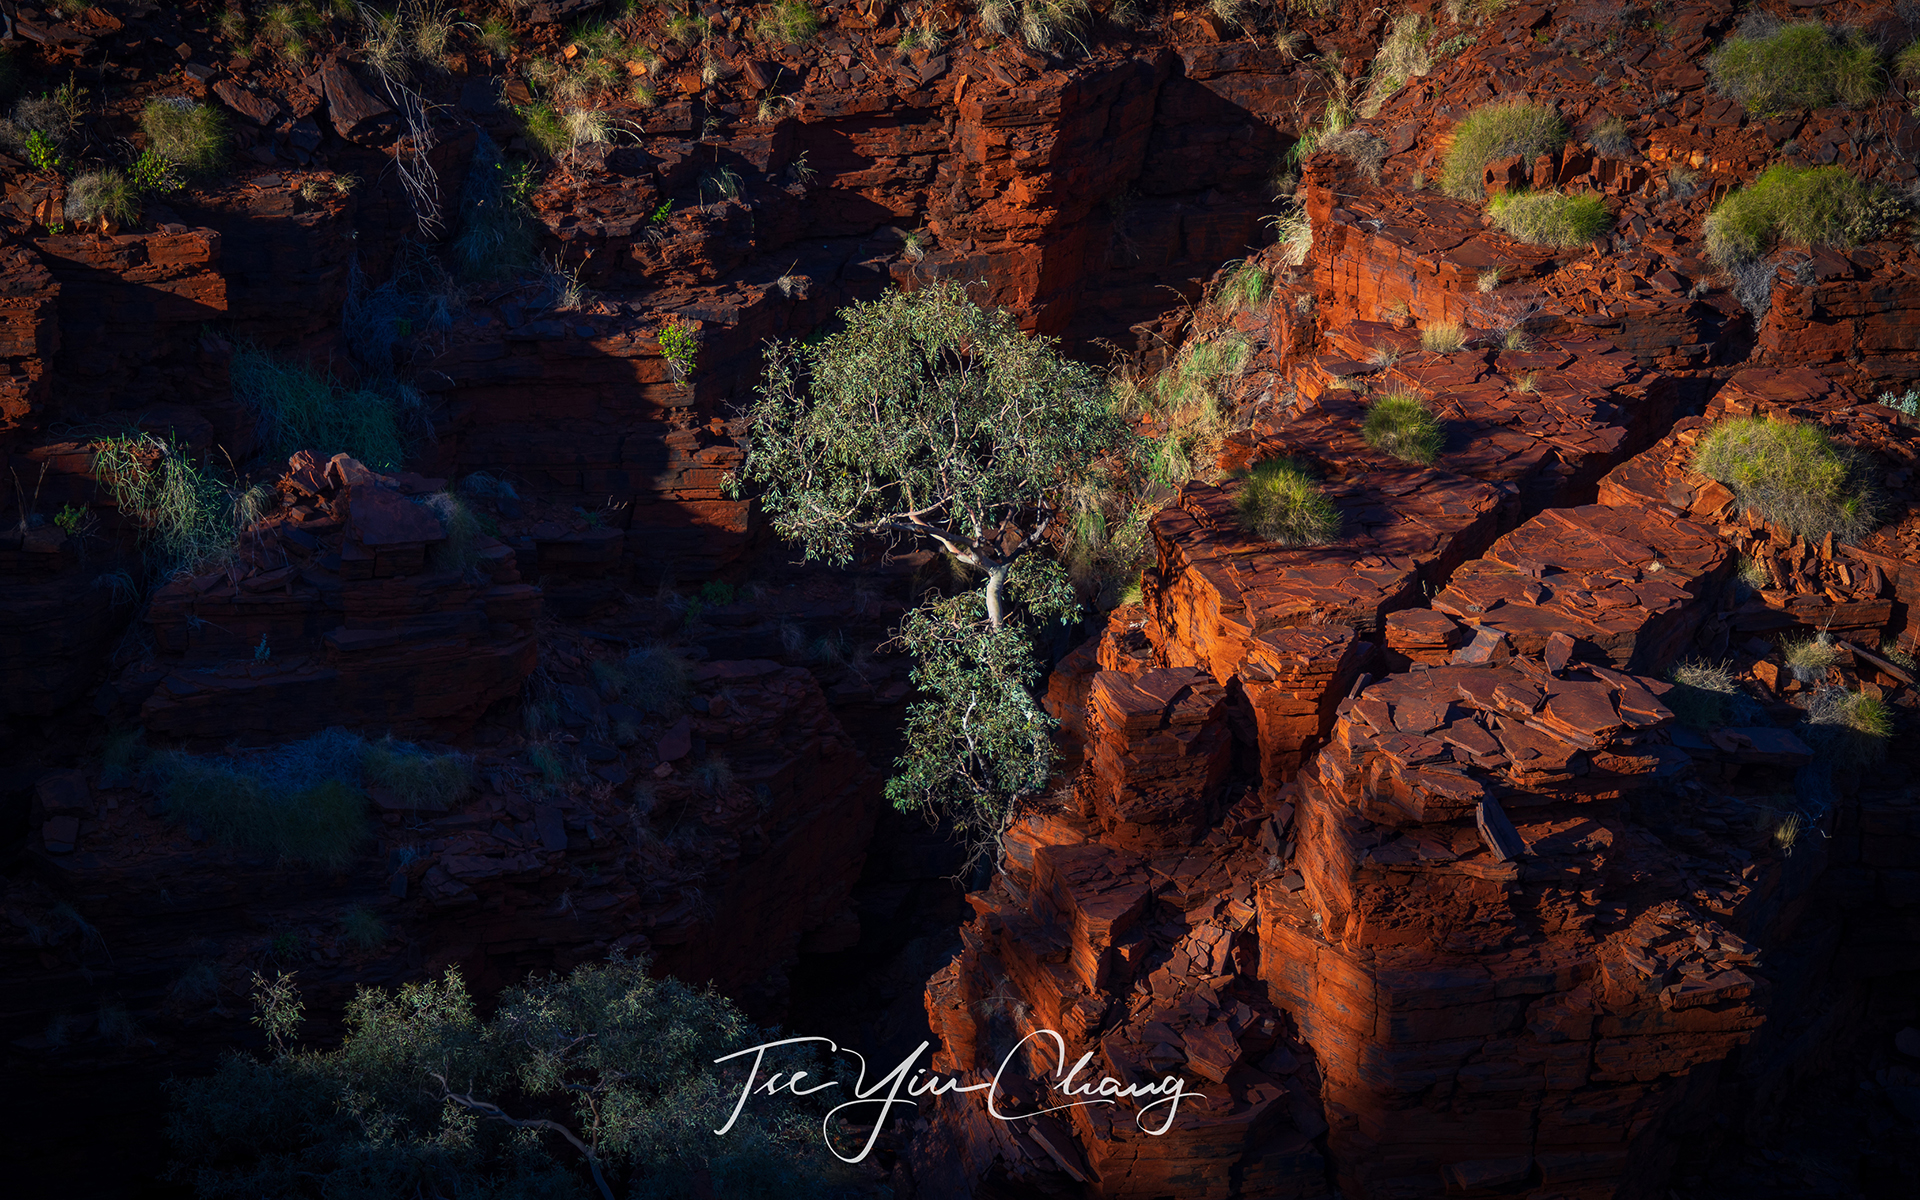 Karijini National Park is Western Australia's second largest national park, crisscrossed by a network of river systems, many of which carved out spectacular gorges through the ochre rock over two billion years ago